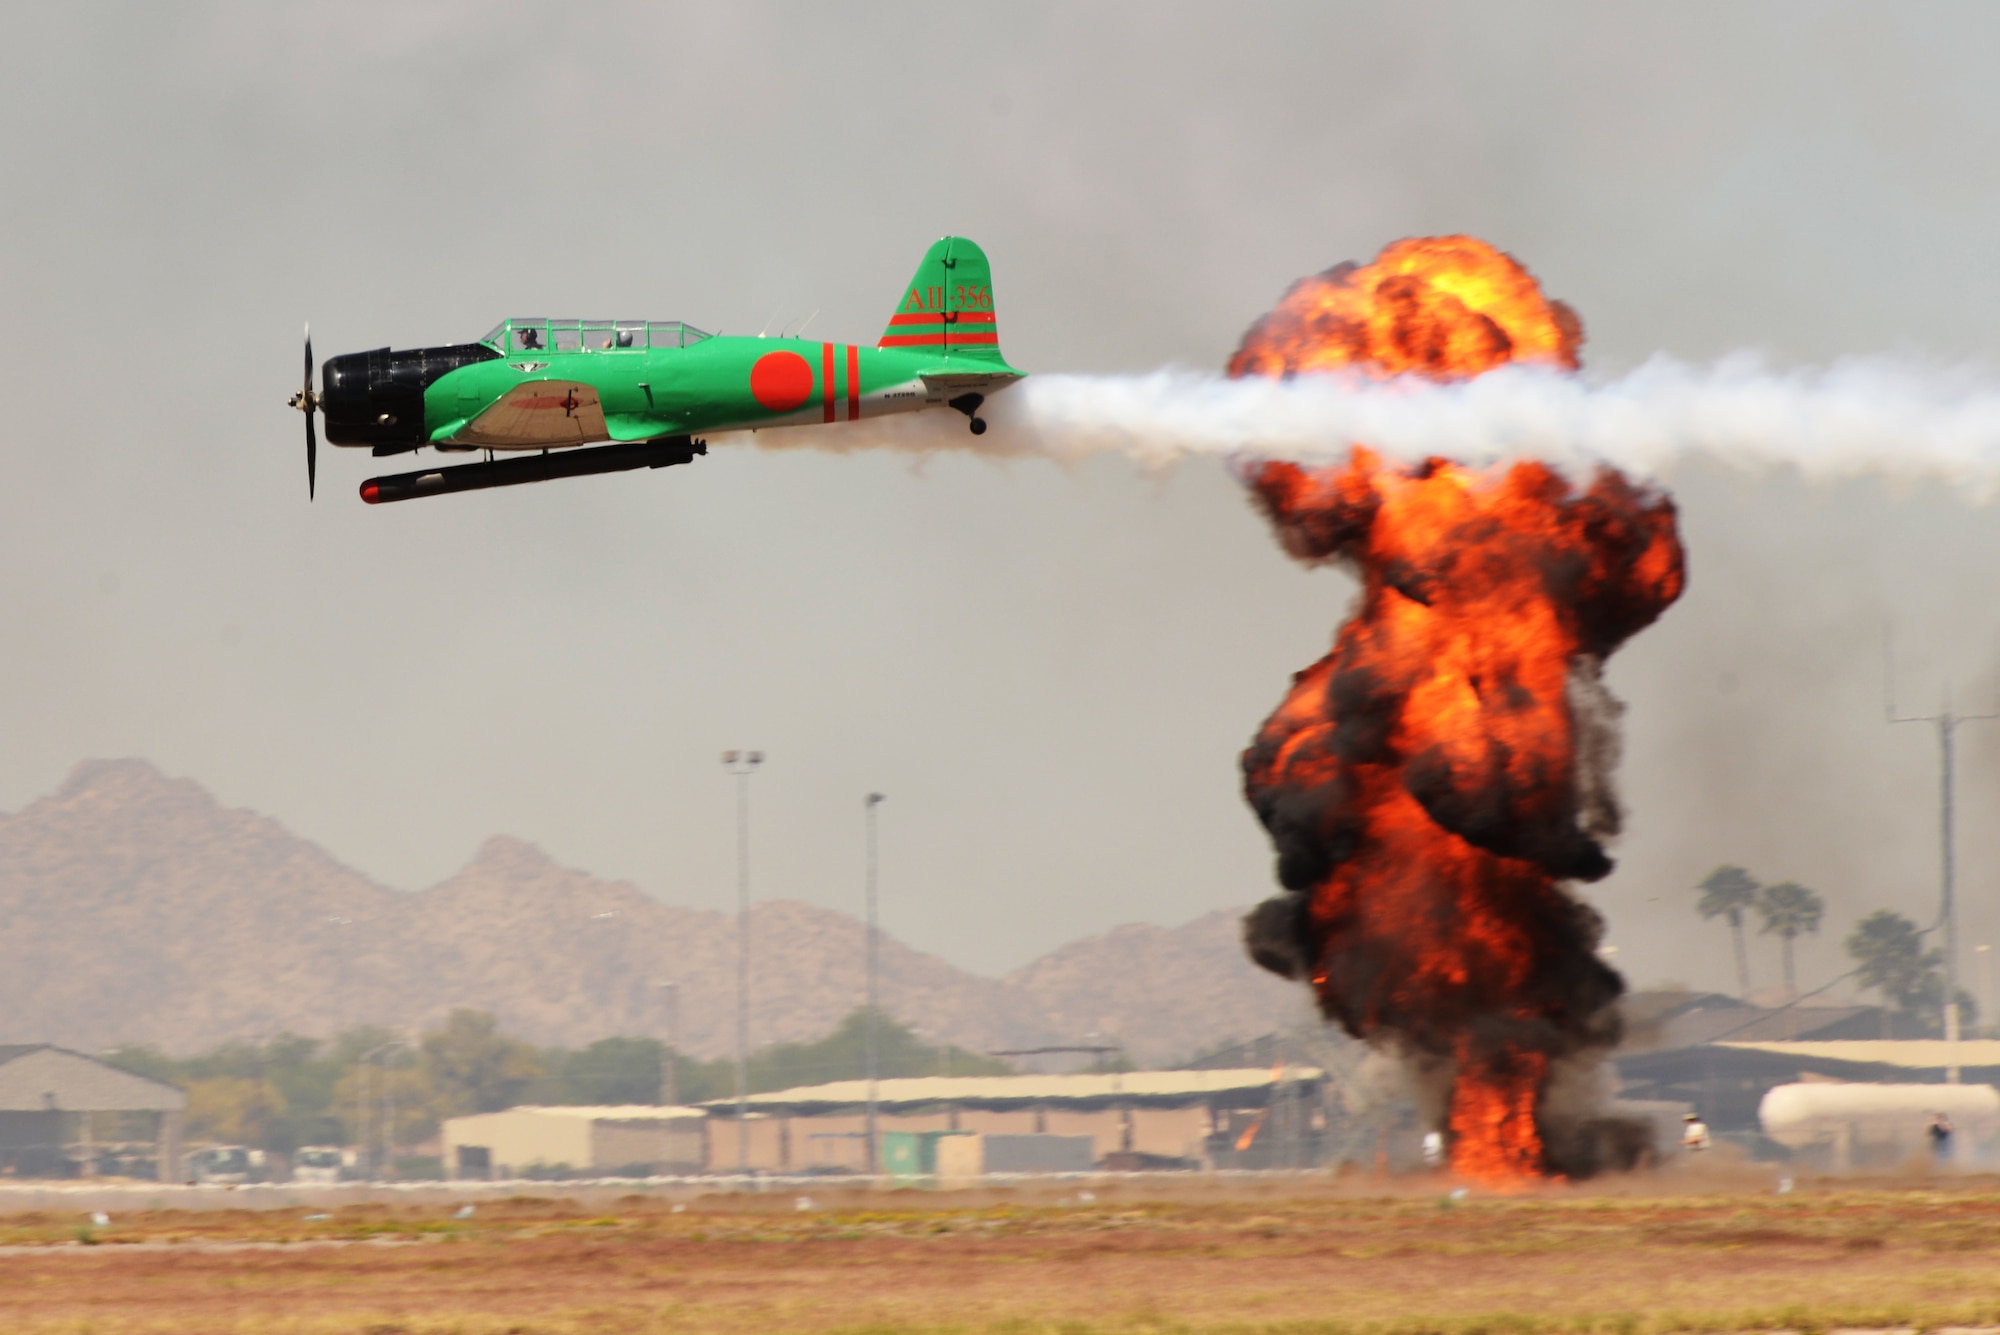 "Tora, Tora, Tora" the Commemorative Air Force's recreation of the Japanese attack on Pearl Harbor that signaled the beginning of the American involvement in World War II April 3, 2016 on Luke Air Force Base, Ariz. "Tora, Tora, Tora" is intended as a memorial to all the soldiers who gave their lives for our country. (U. S. Air Force photo by Staff Sgt. Staci Miller)